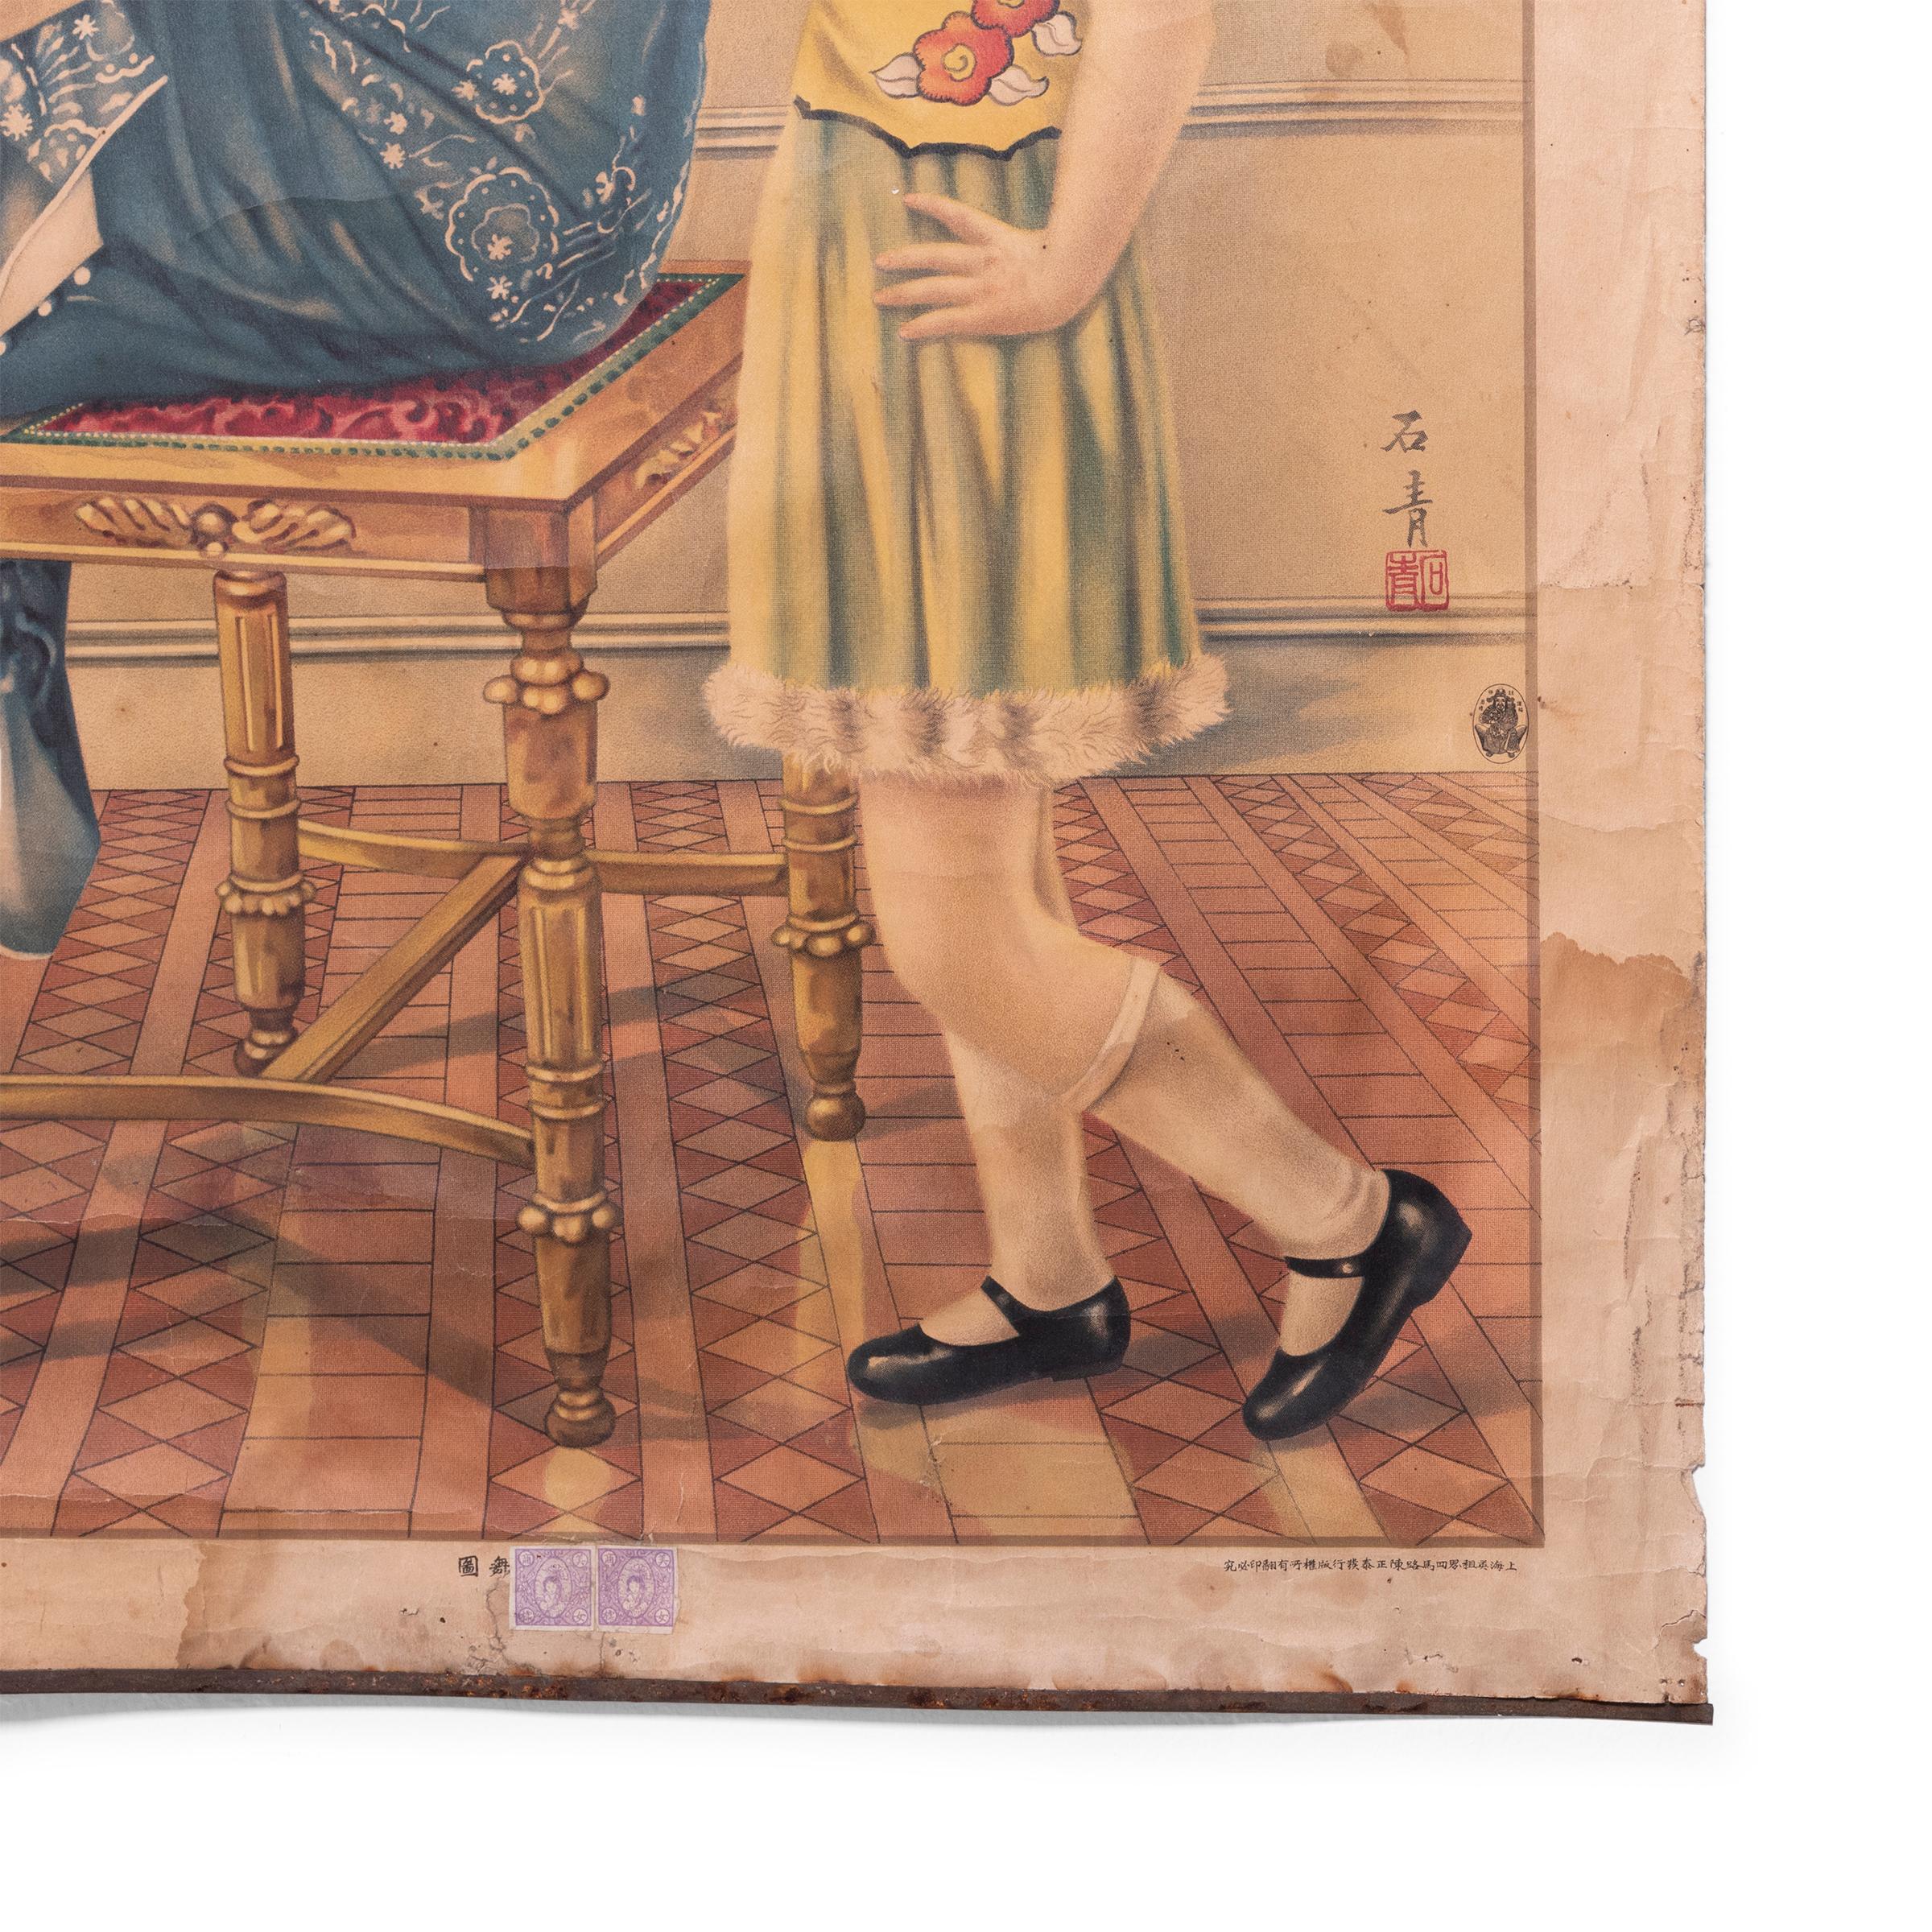 This poster from the 1920s melds the meticulous detail of traditional Chinese painting with the craft of color lithography. The poster depicts two young girls gathered by an ornate stool, dressed in traditional qipaos, but with Western hairstyles